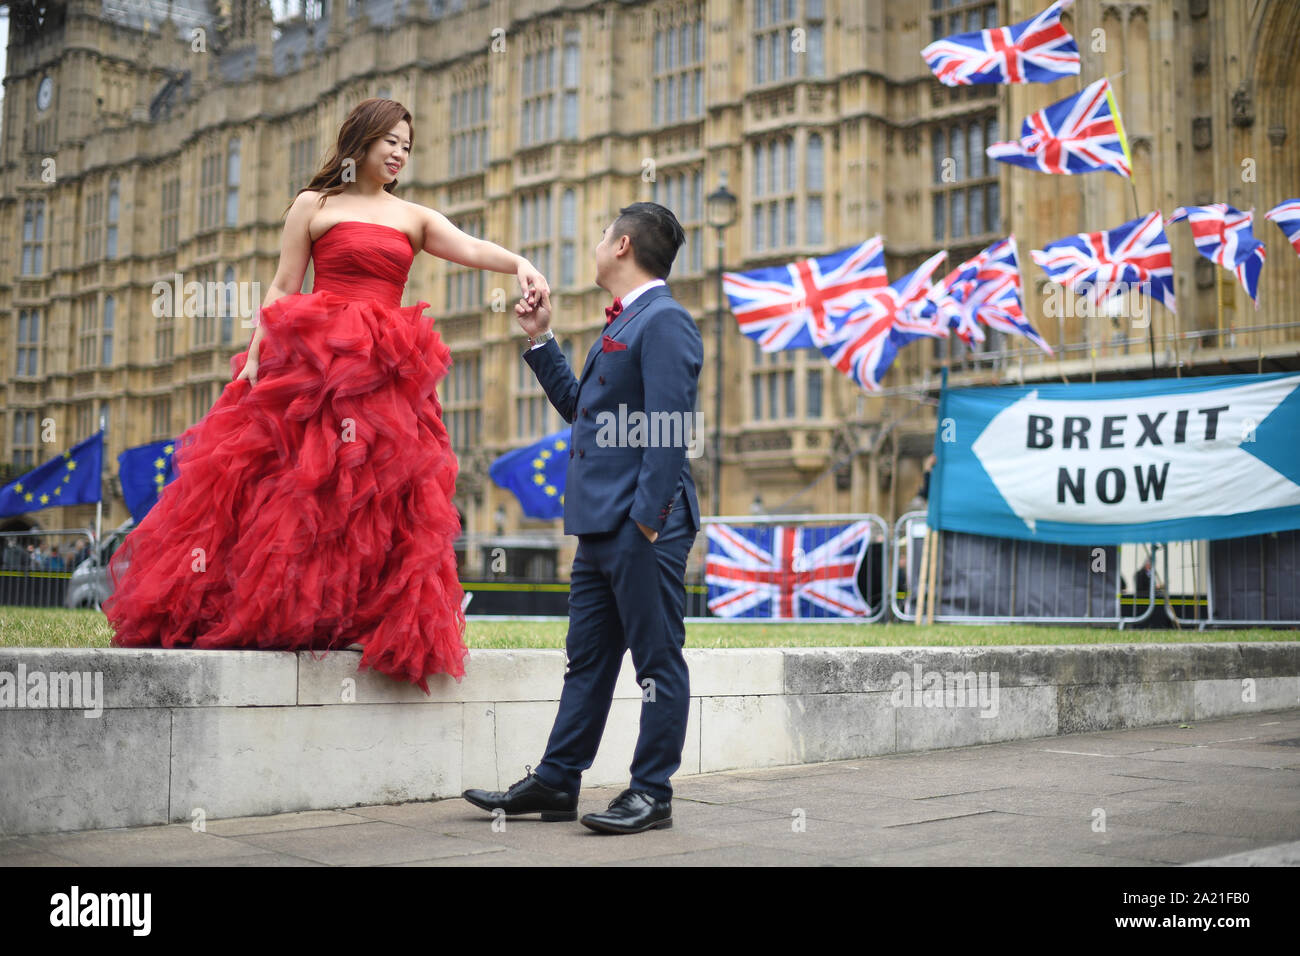 Two tourists posing for pictures in front of Union and EU flags outside the Palace of Westminster, London. Stock Photo